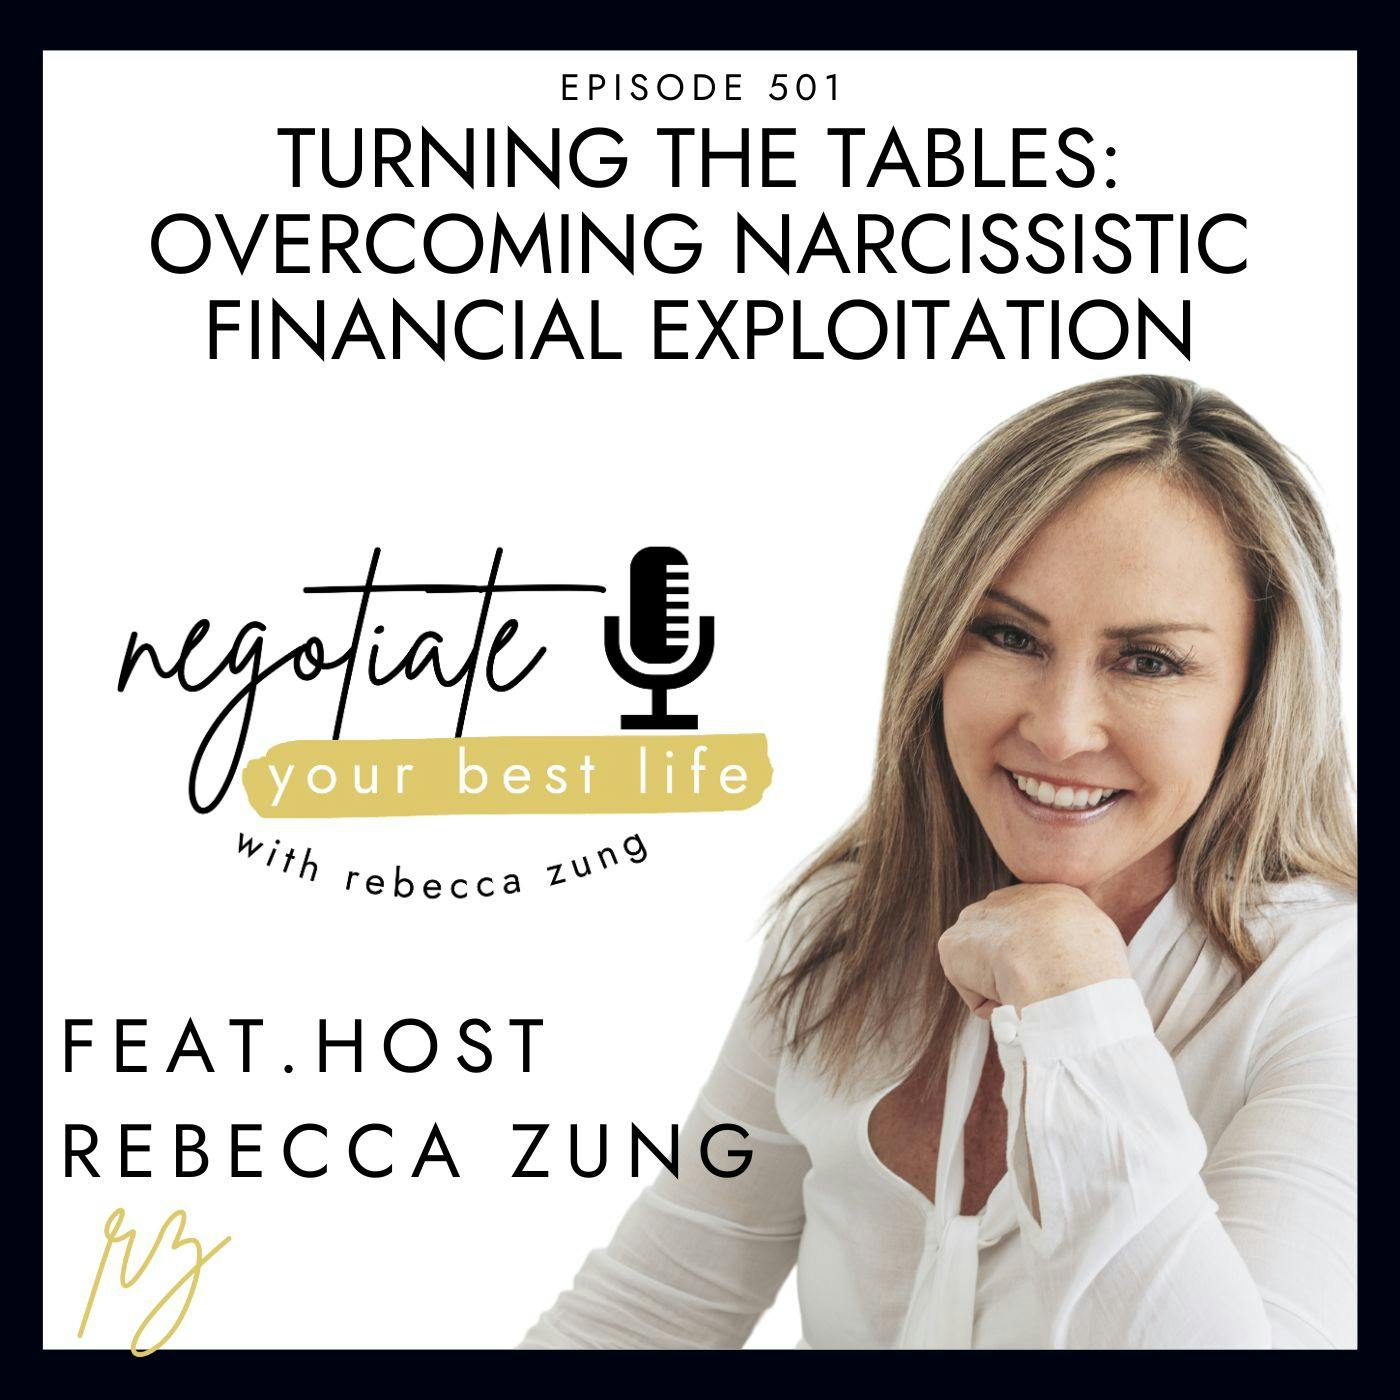 Turning the Tables: Overcoming Narcissistic Financial Exploitation with Rebecca Zung on Negotiate Your Best Life #501